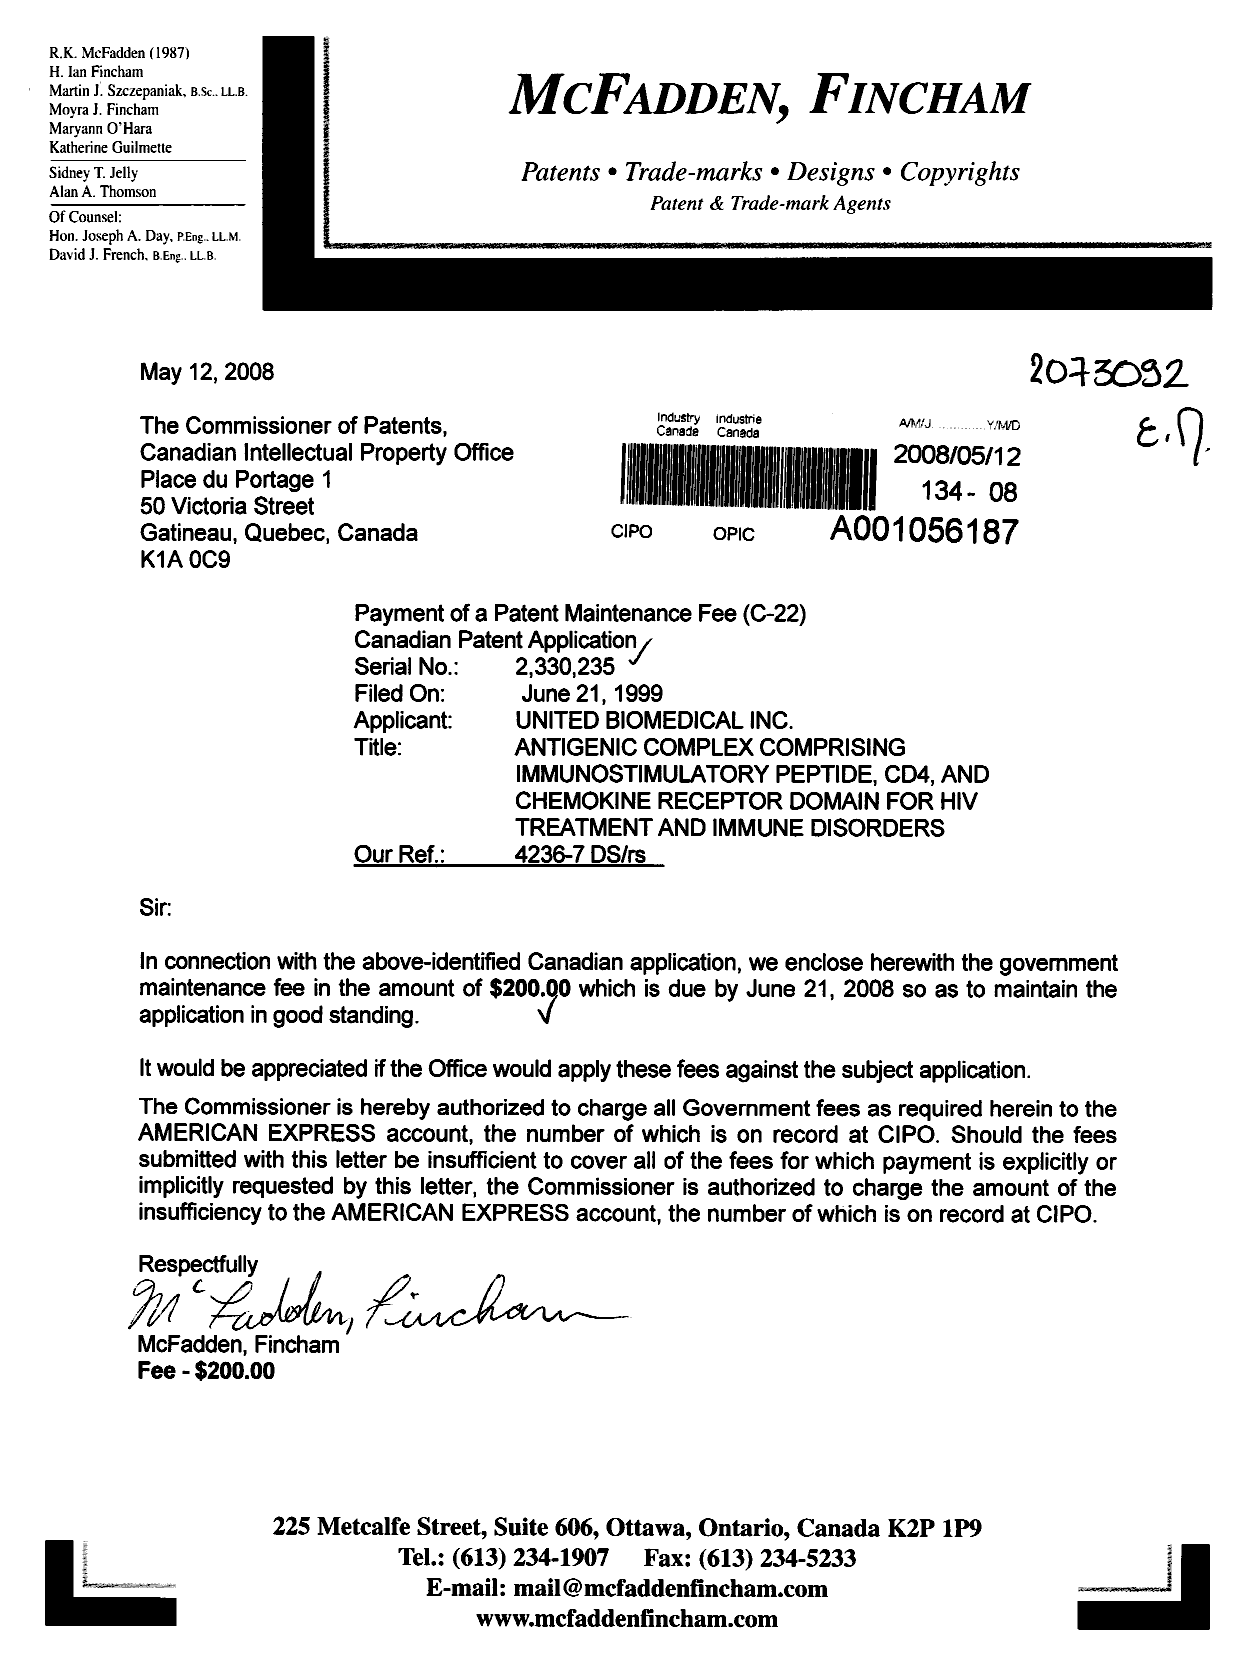 Canadian Patent Document 2330235. Fees 20080512. Image 1 of 1